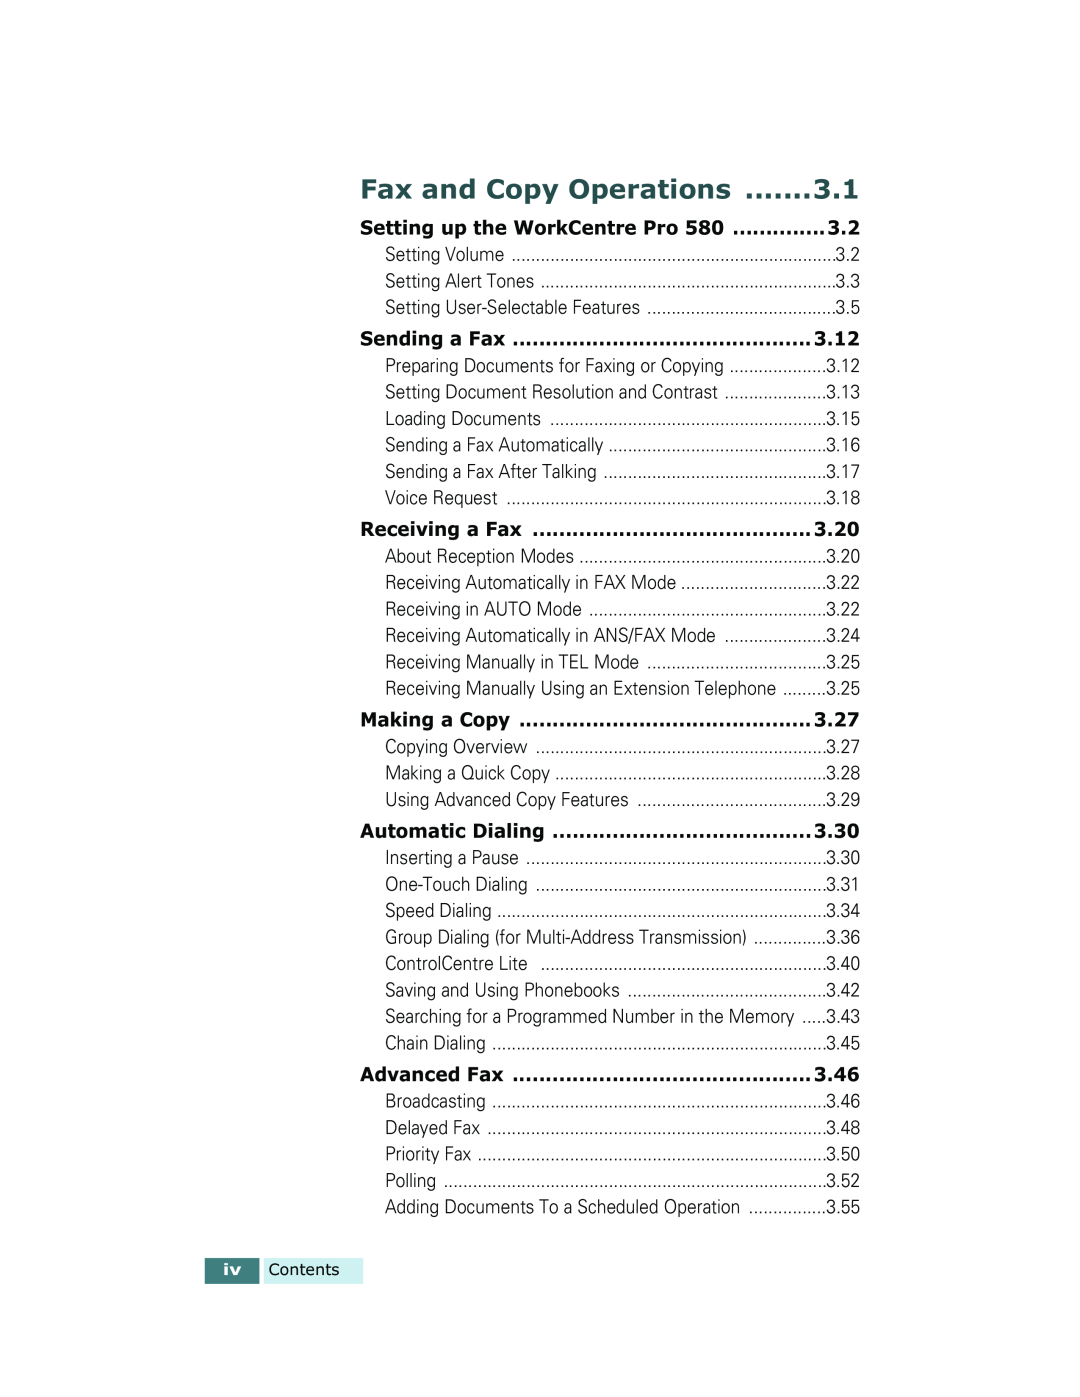 Xerox Pro 580 manual Fax and Copy Operations 